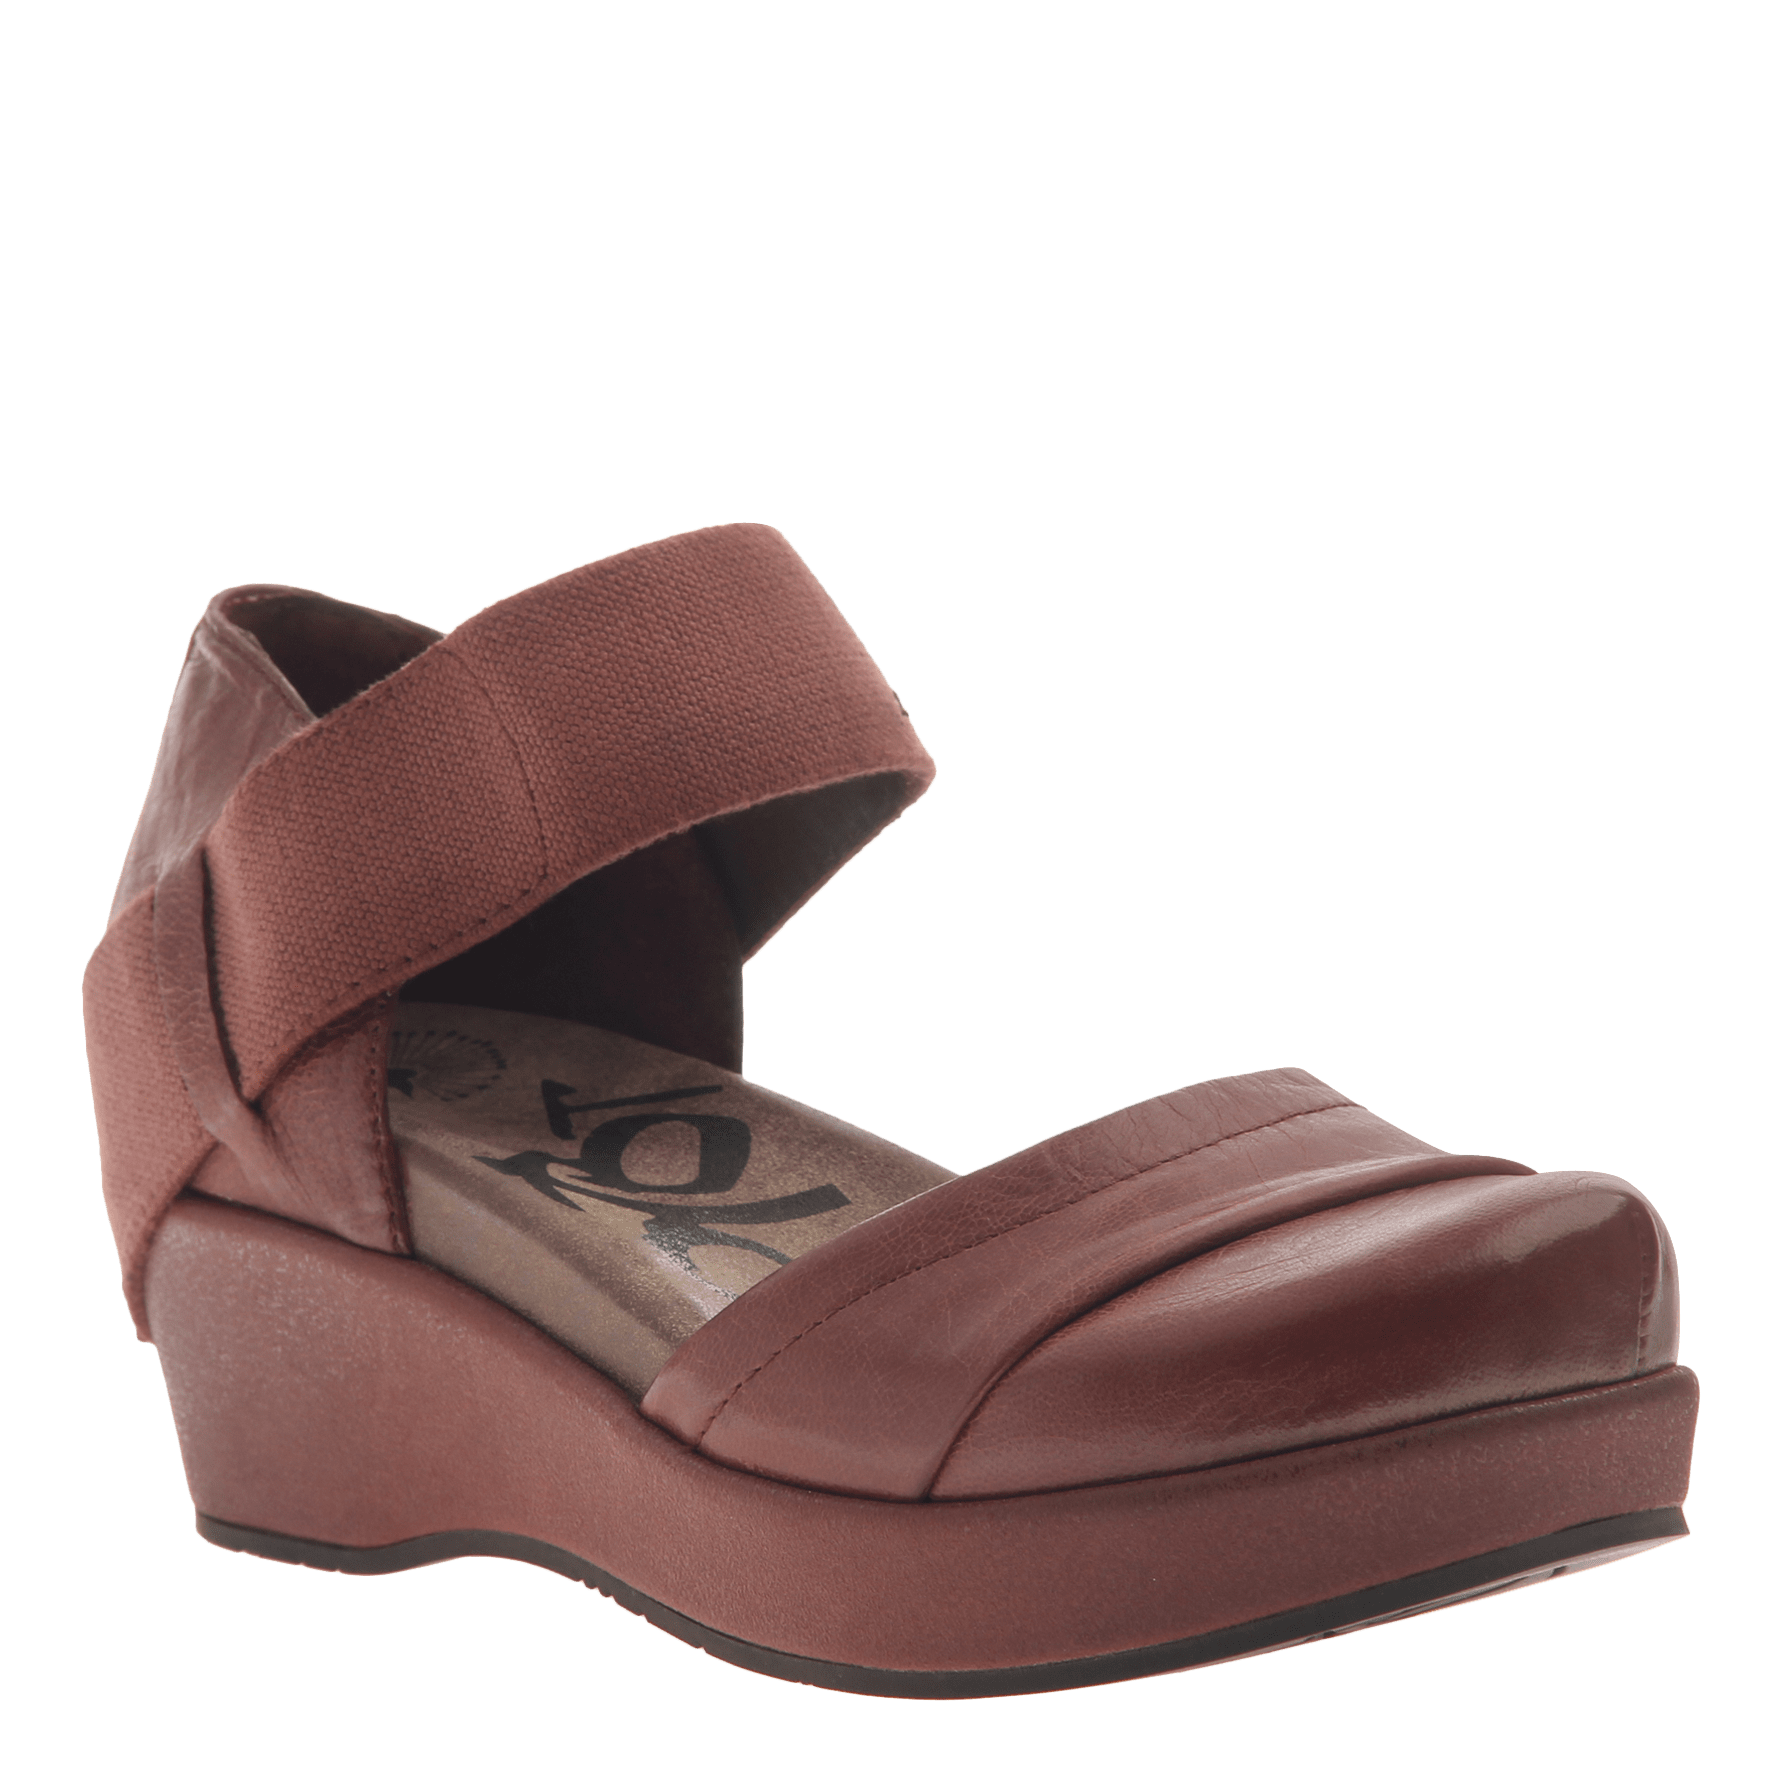 Wander Out in Sangria Closed Toe Wedges 